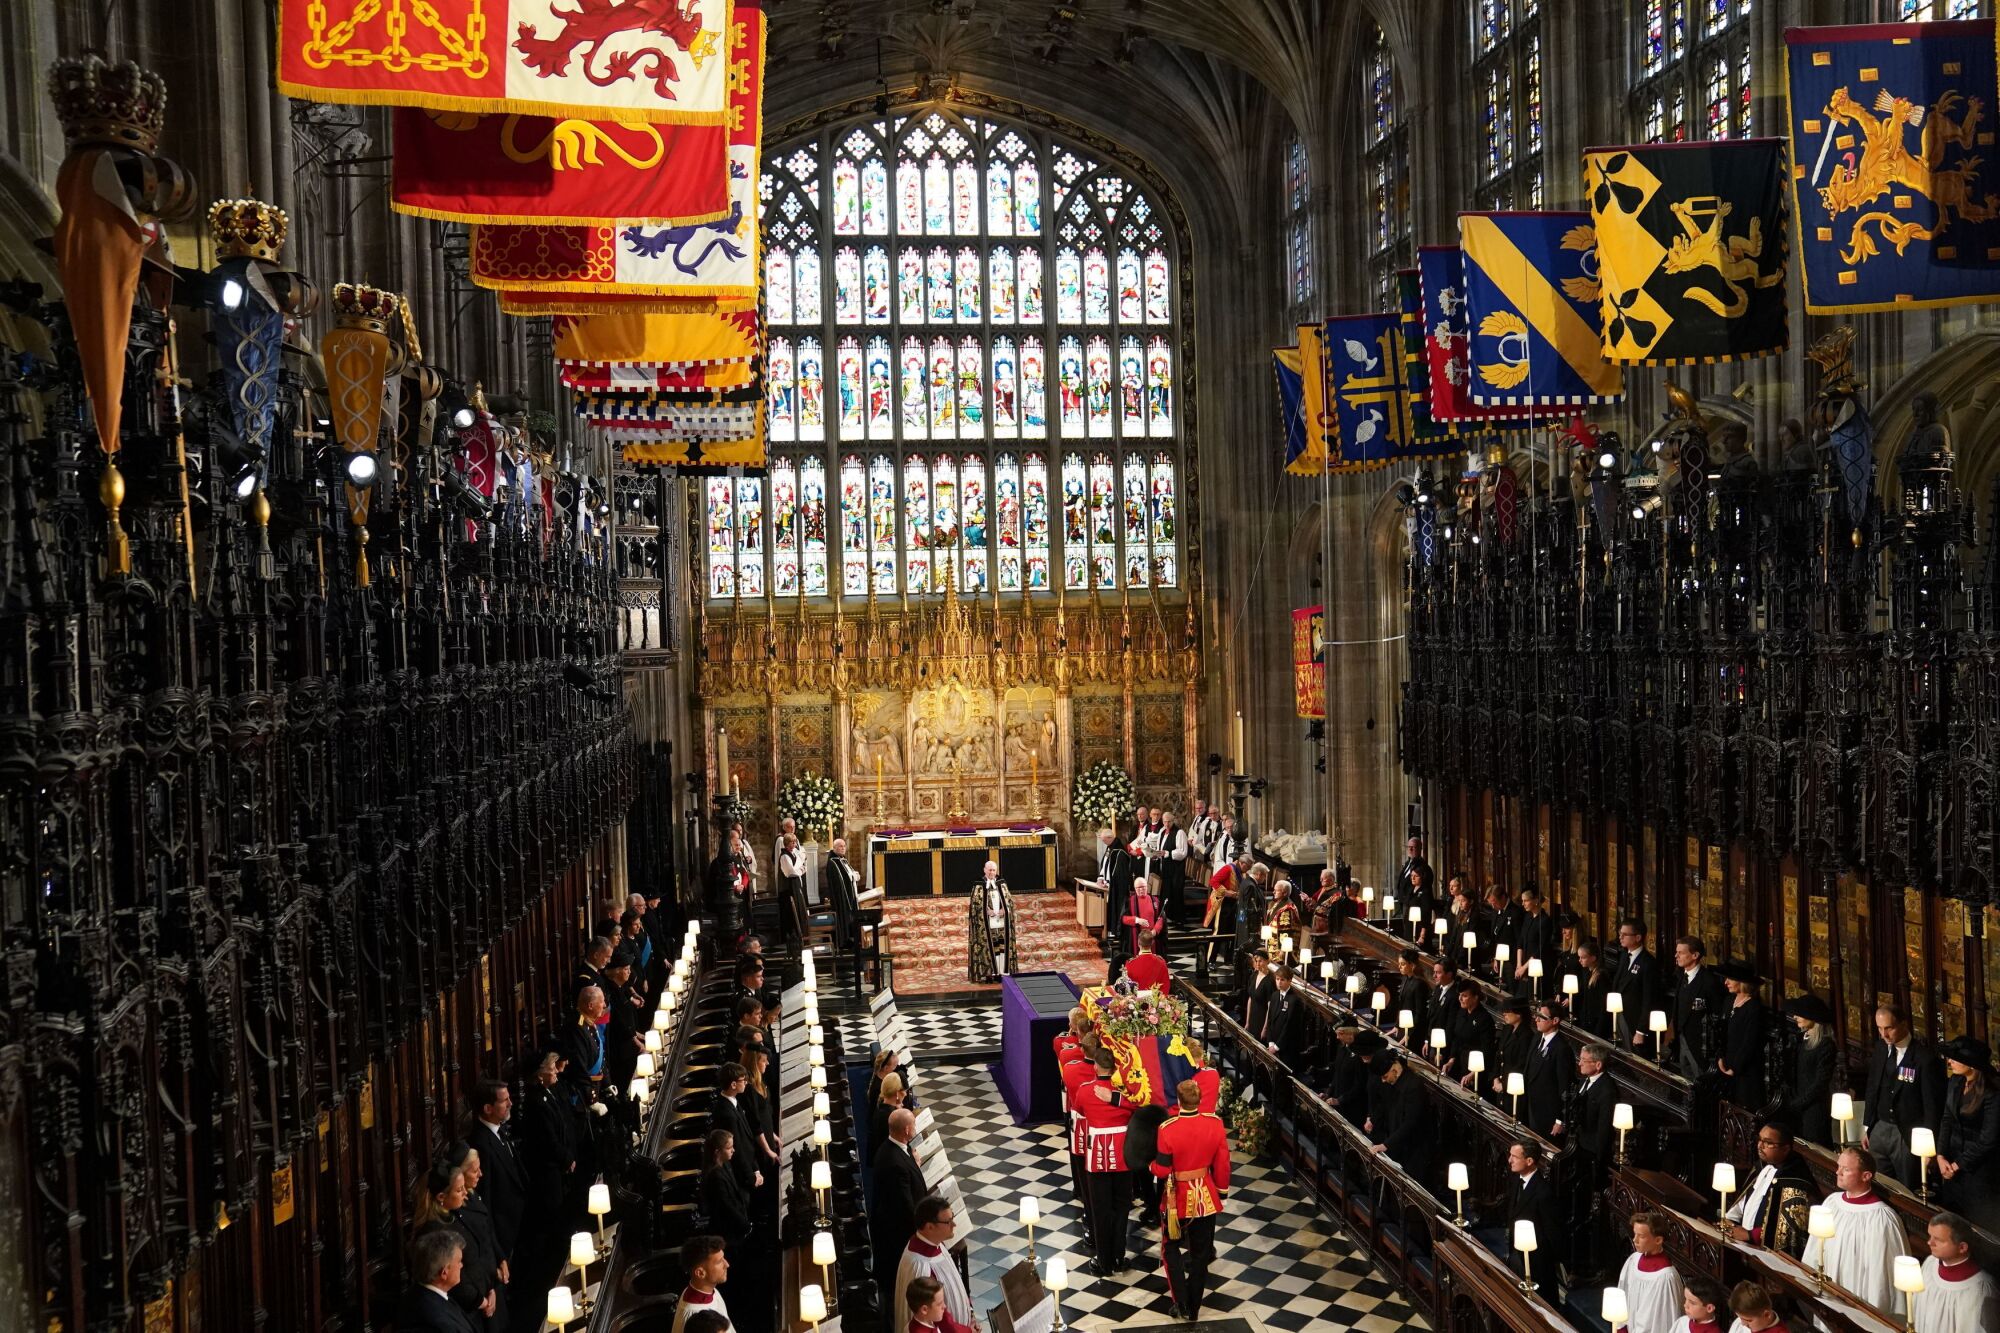 Uniformed bearers carry the coffin into St. George's Chapel as those present stand in pews on either side of the aisle.